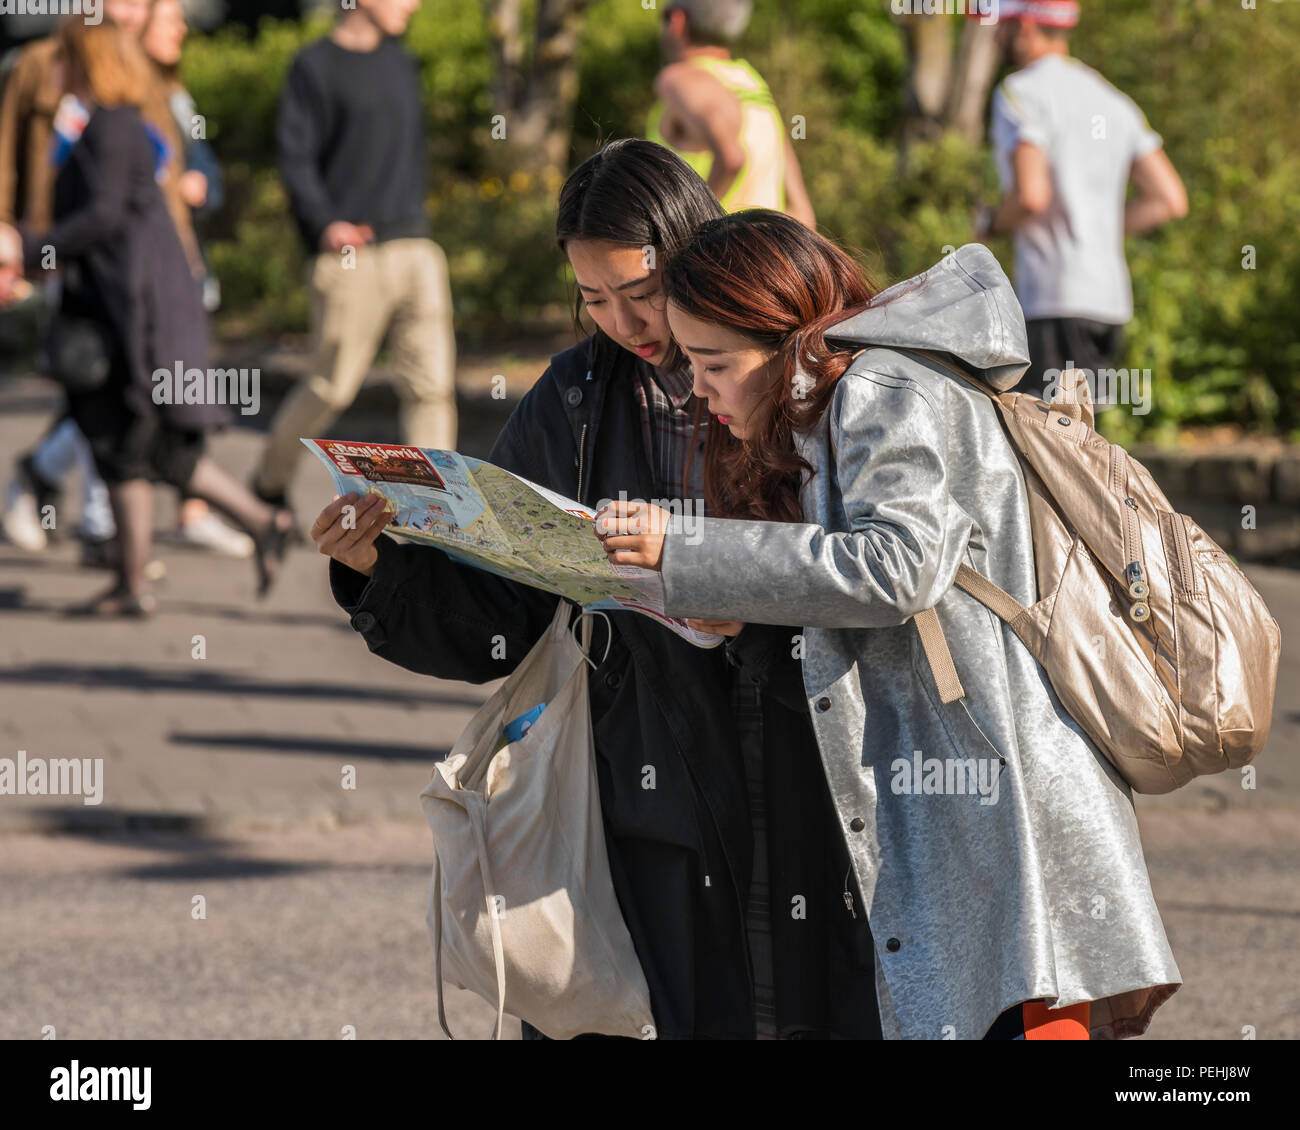 Tourists looking at map, Reykjavik, Iceland Stock Photo